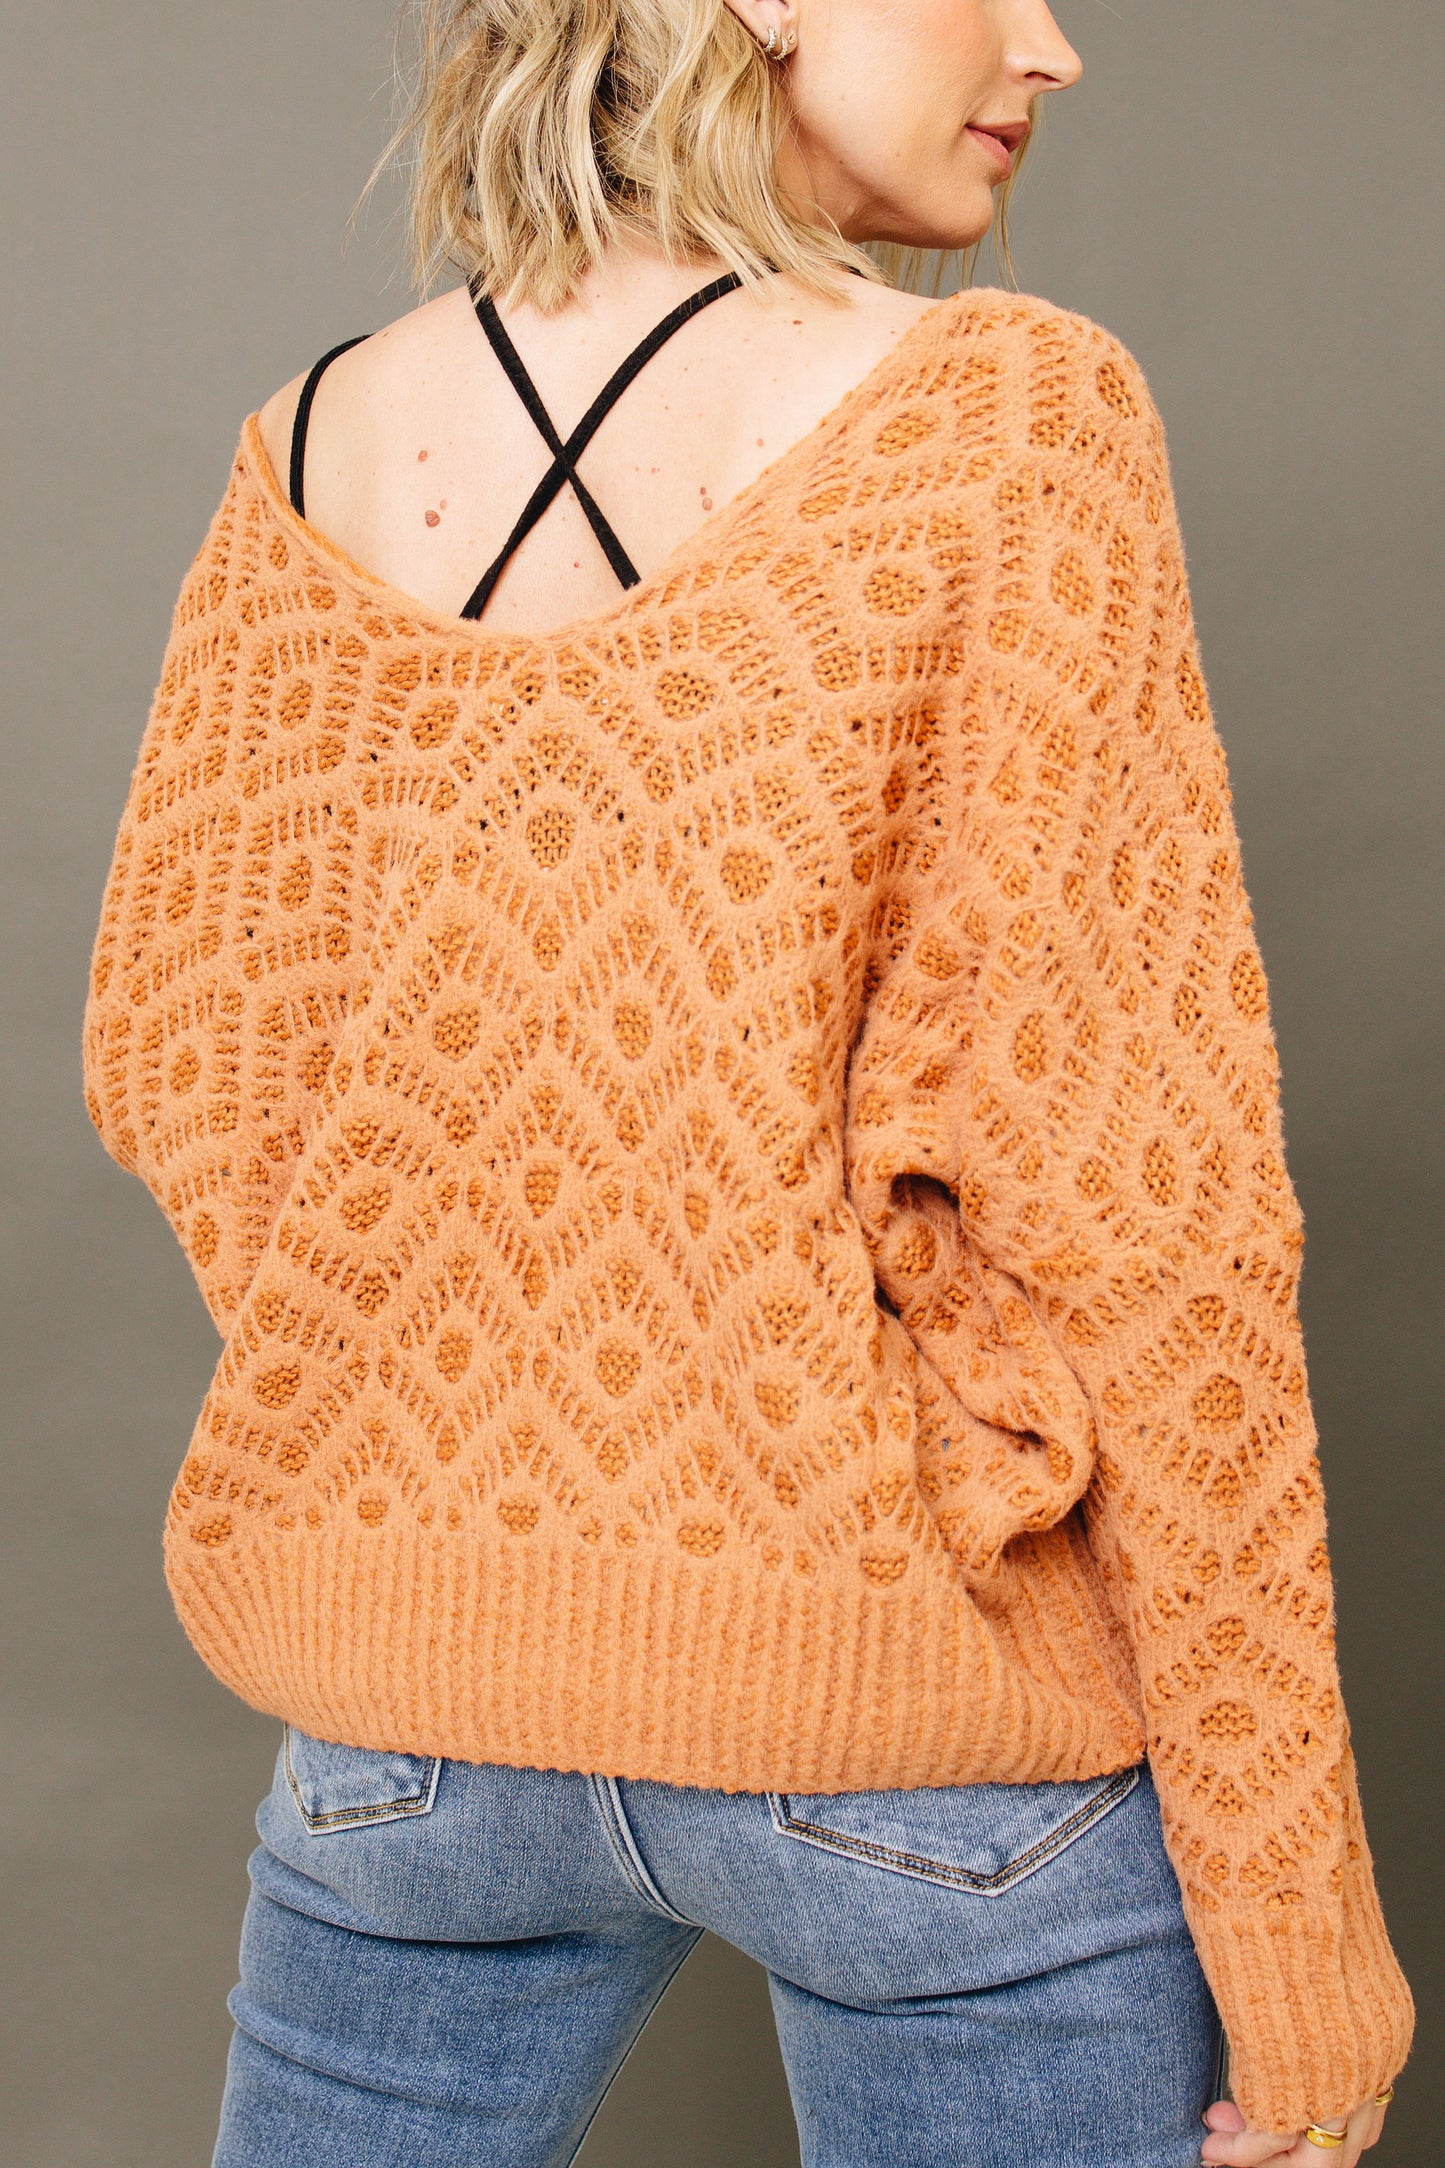 Simply Perfect V-Neck Patterned Sweater (S-L)